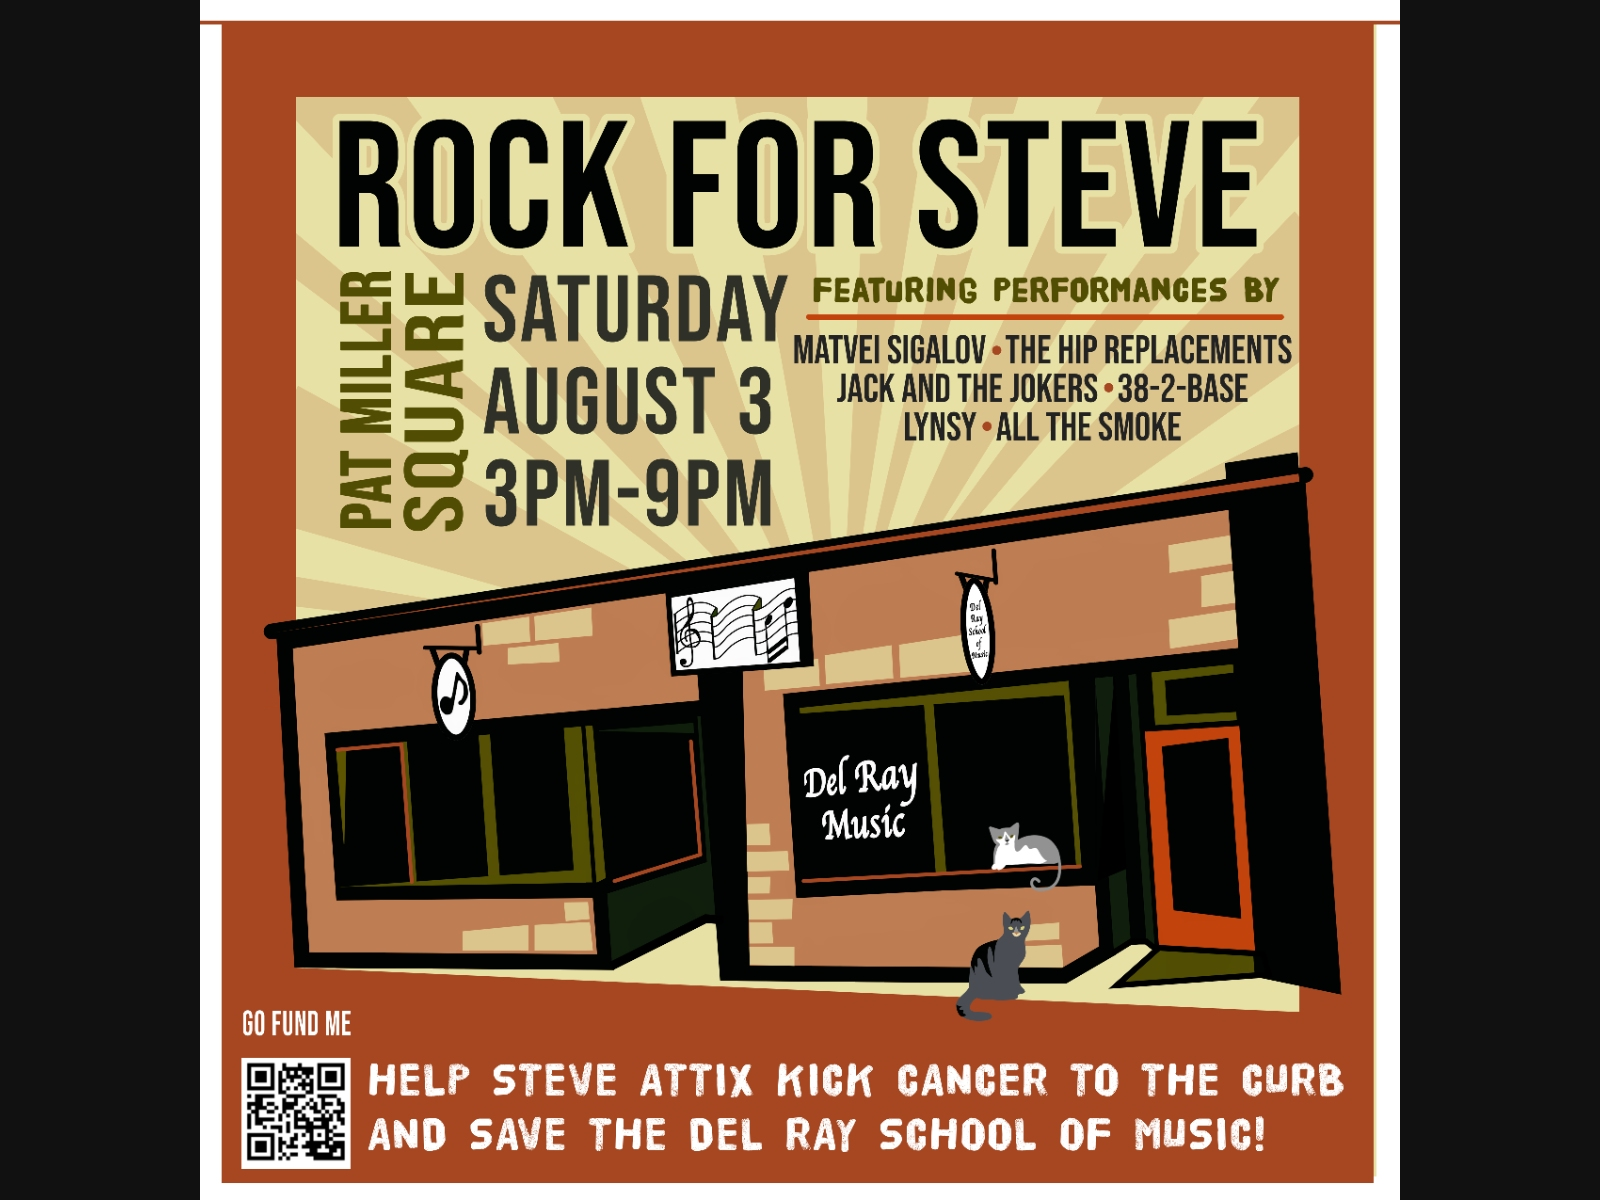 Concert To Benefit Del Ray School of Music Owner Battling Cancer